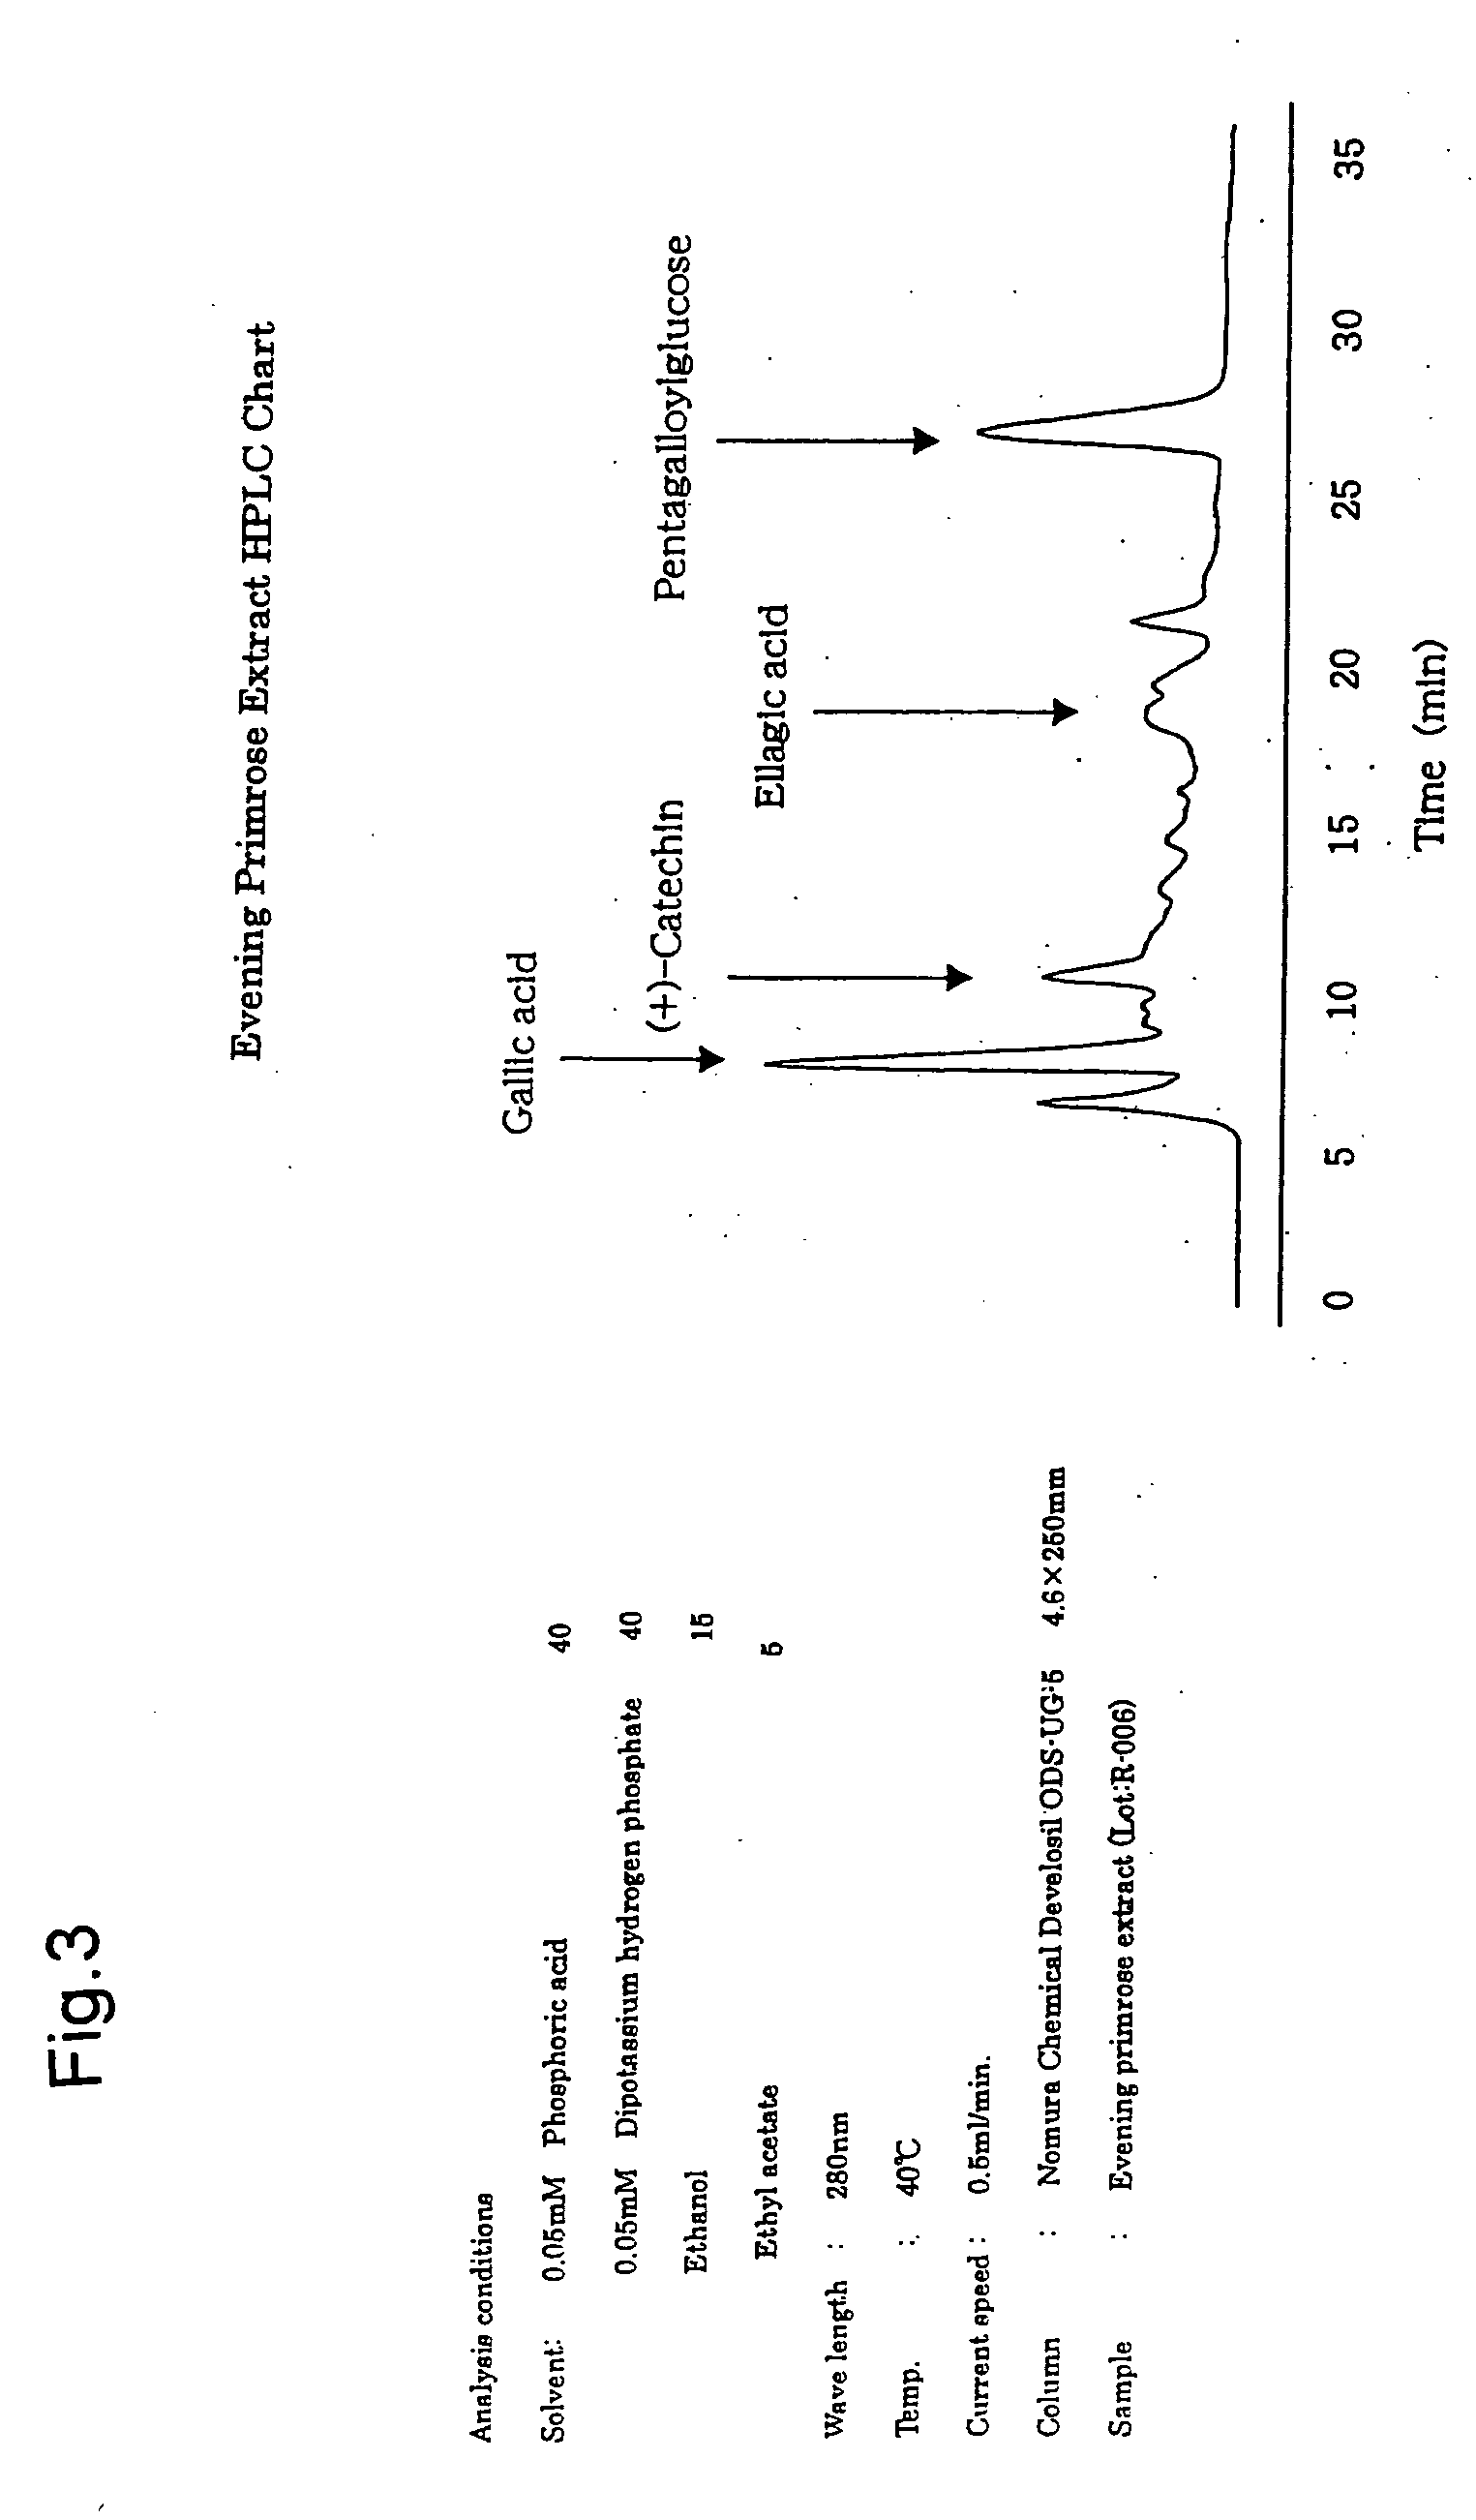 Method of treating diabetes and obesity using carbohydrate absorption inhibitors